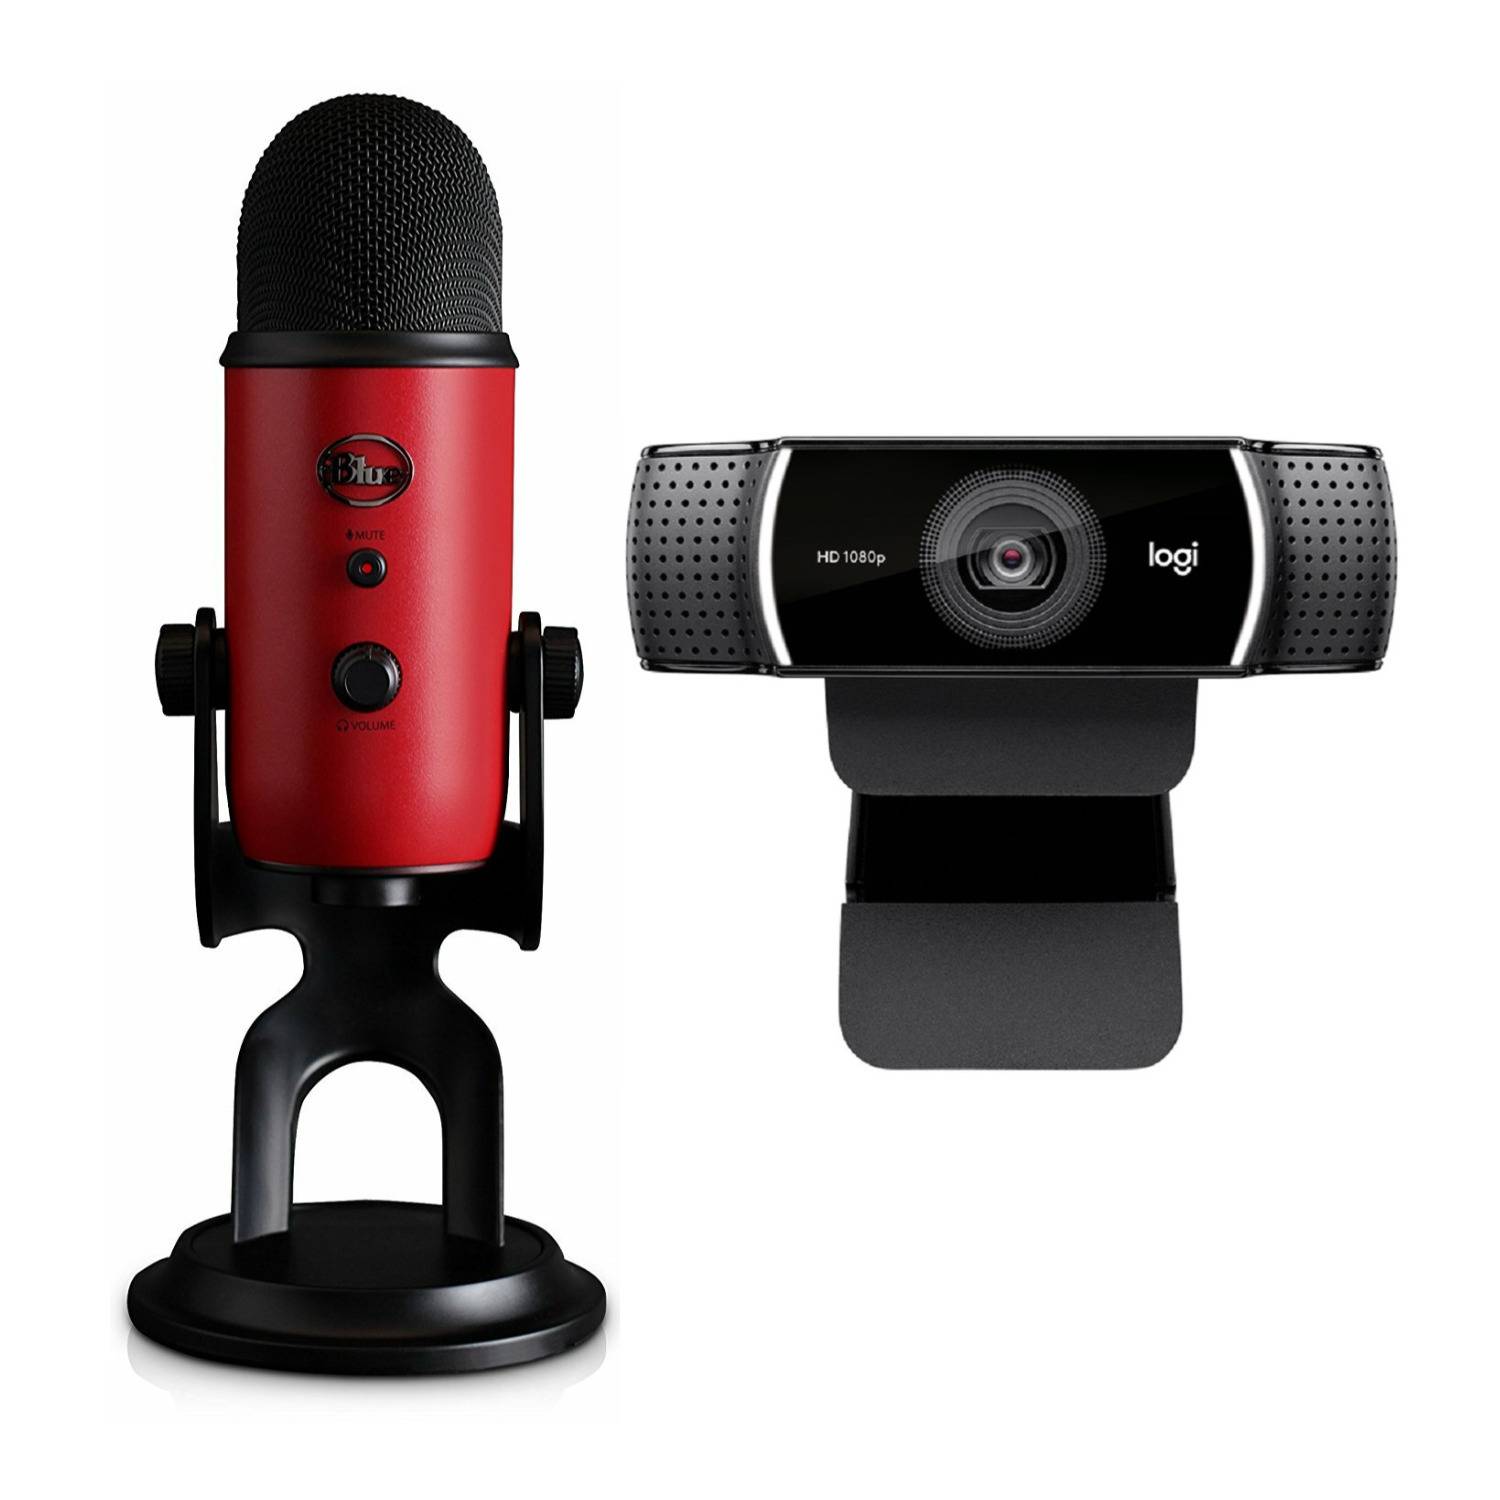 Blue Microphones Yeti Red Microphone with Logitech C922 Pro Stream Webcam